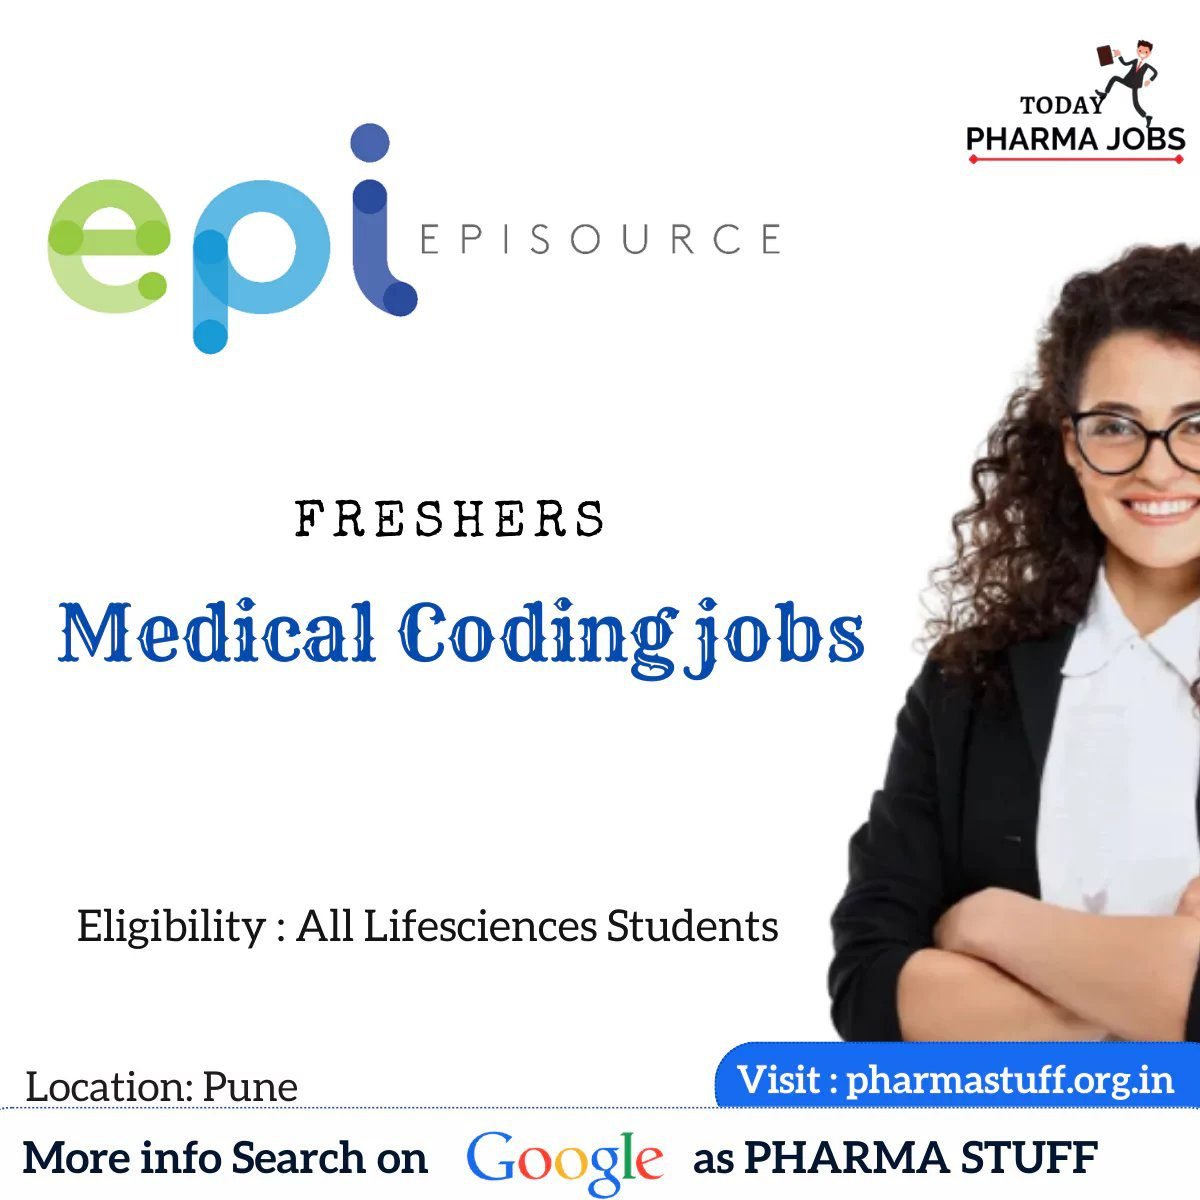 episource medical coding jobs for freshers trainee coder4710052439810674266.